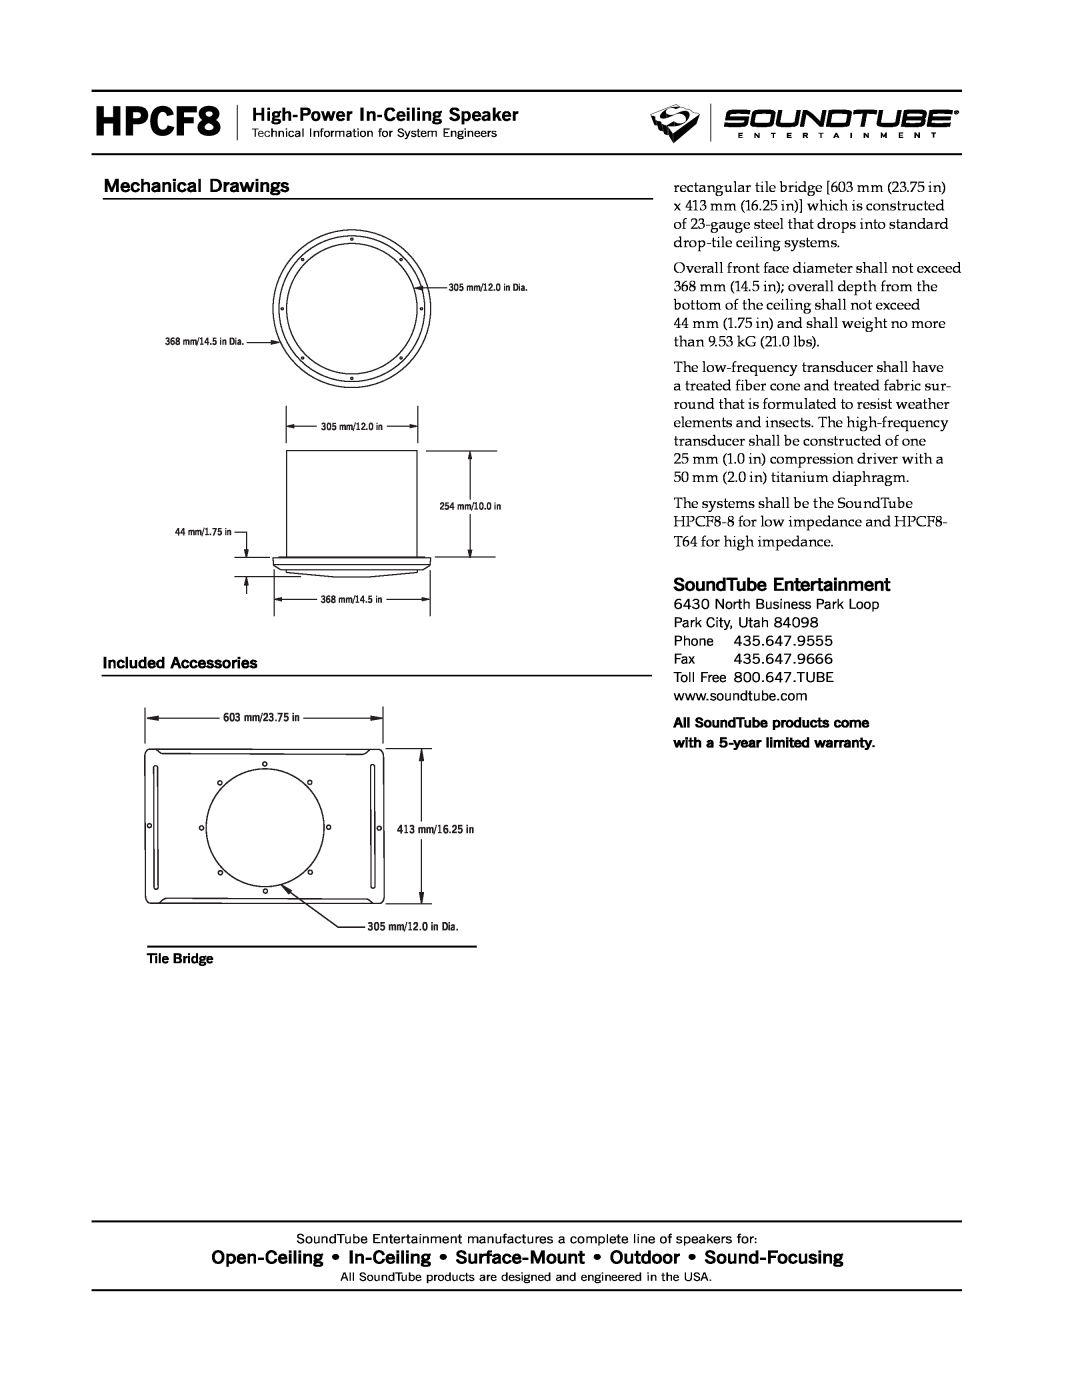 Phase Technology HPCF8 specifications Mechanical Drawings, SoundTube Entertainment, High-Power In-CeilingSpeaker 